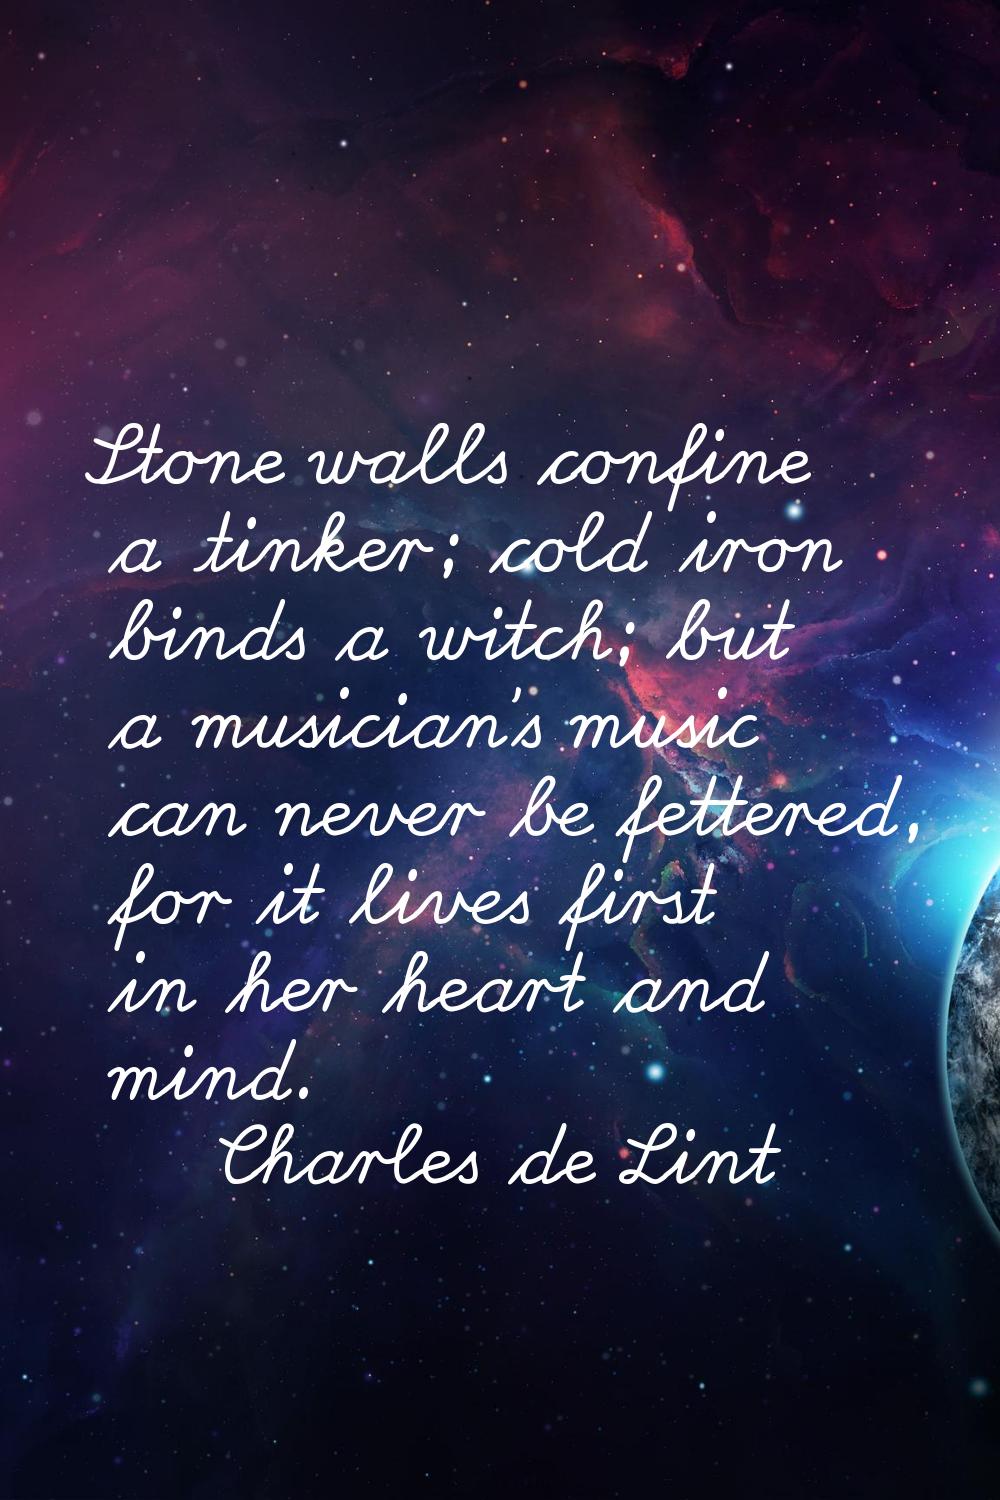 Stone walls confine a tinker; cold iron binds a witch; but a musician's music can never be fettered